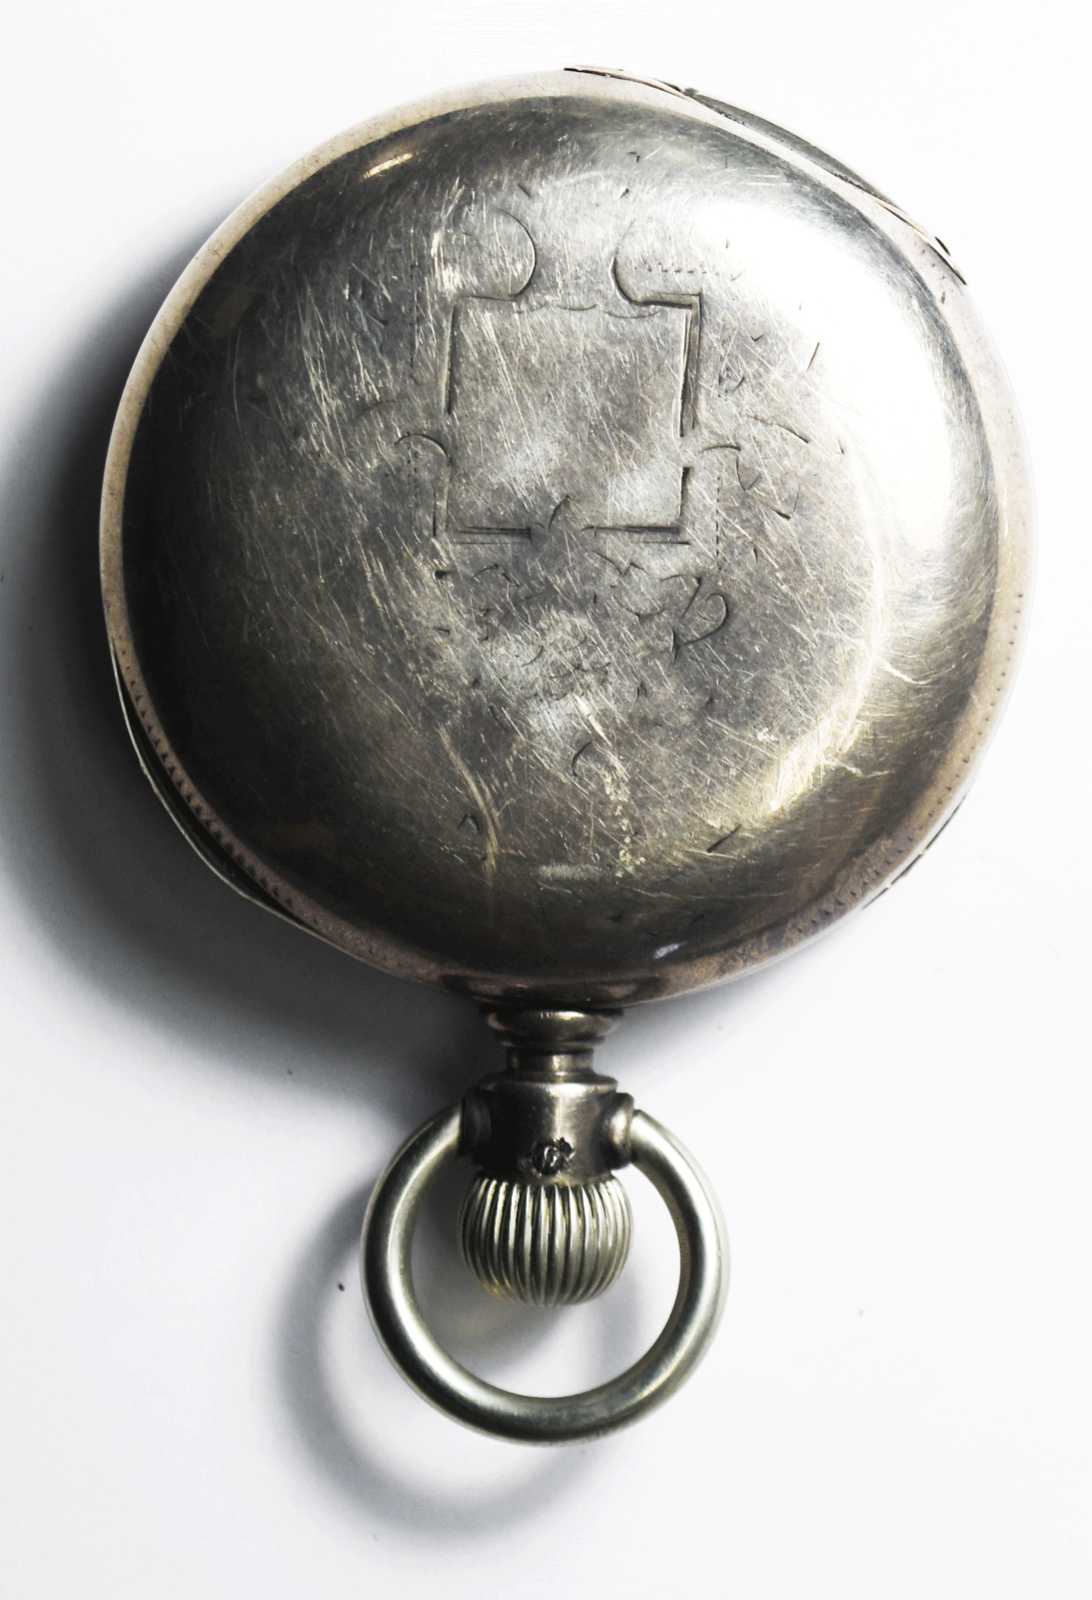 1878 Rockford Transitional KW PW LS Pocket Watch OF Coin #4 Silver Case Size 18